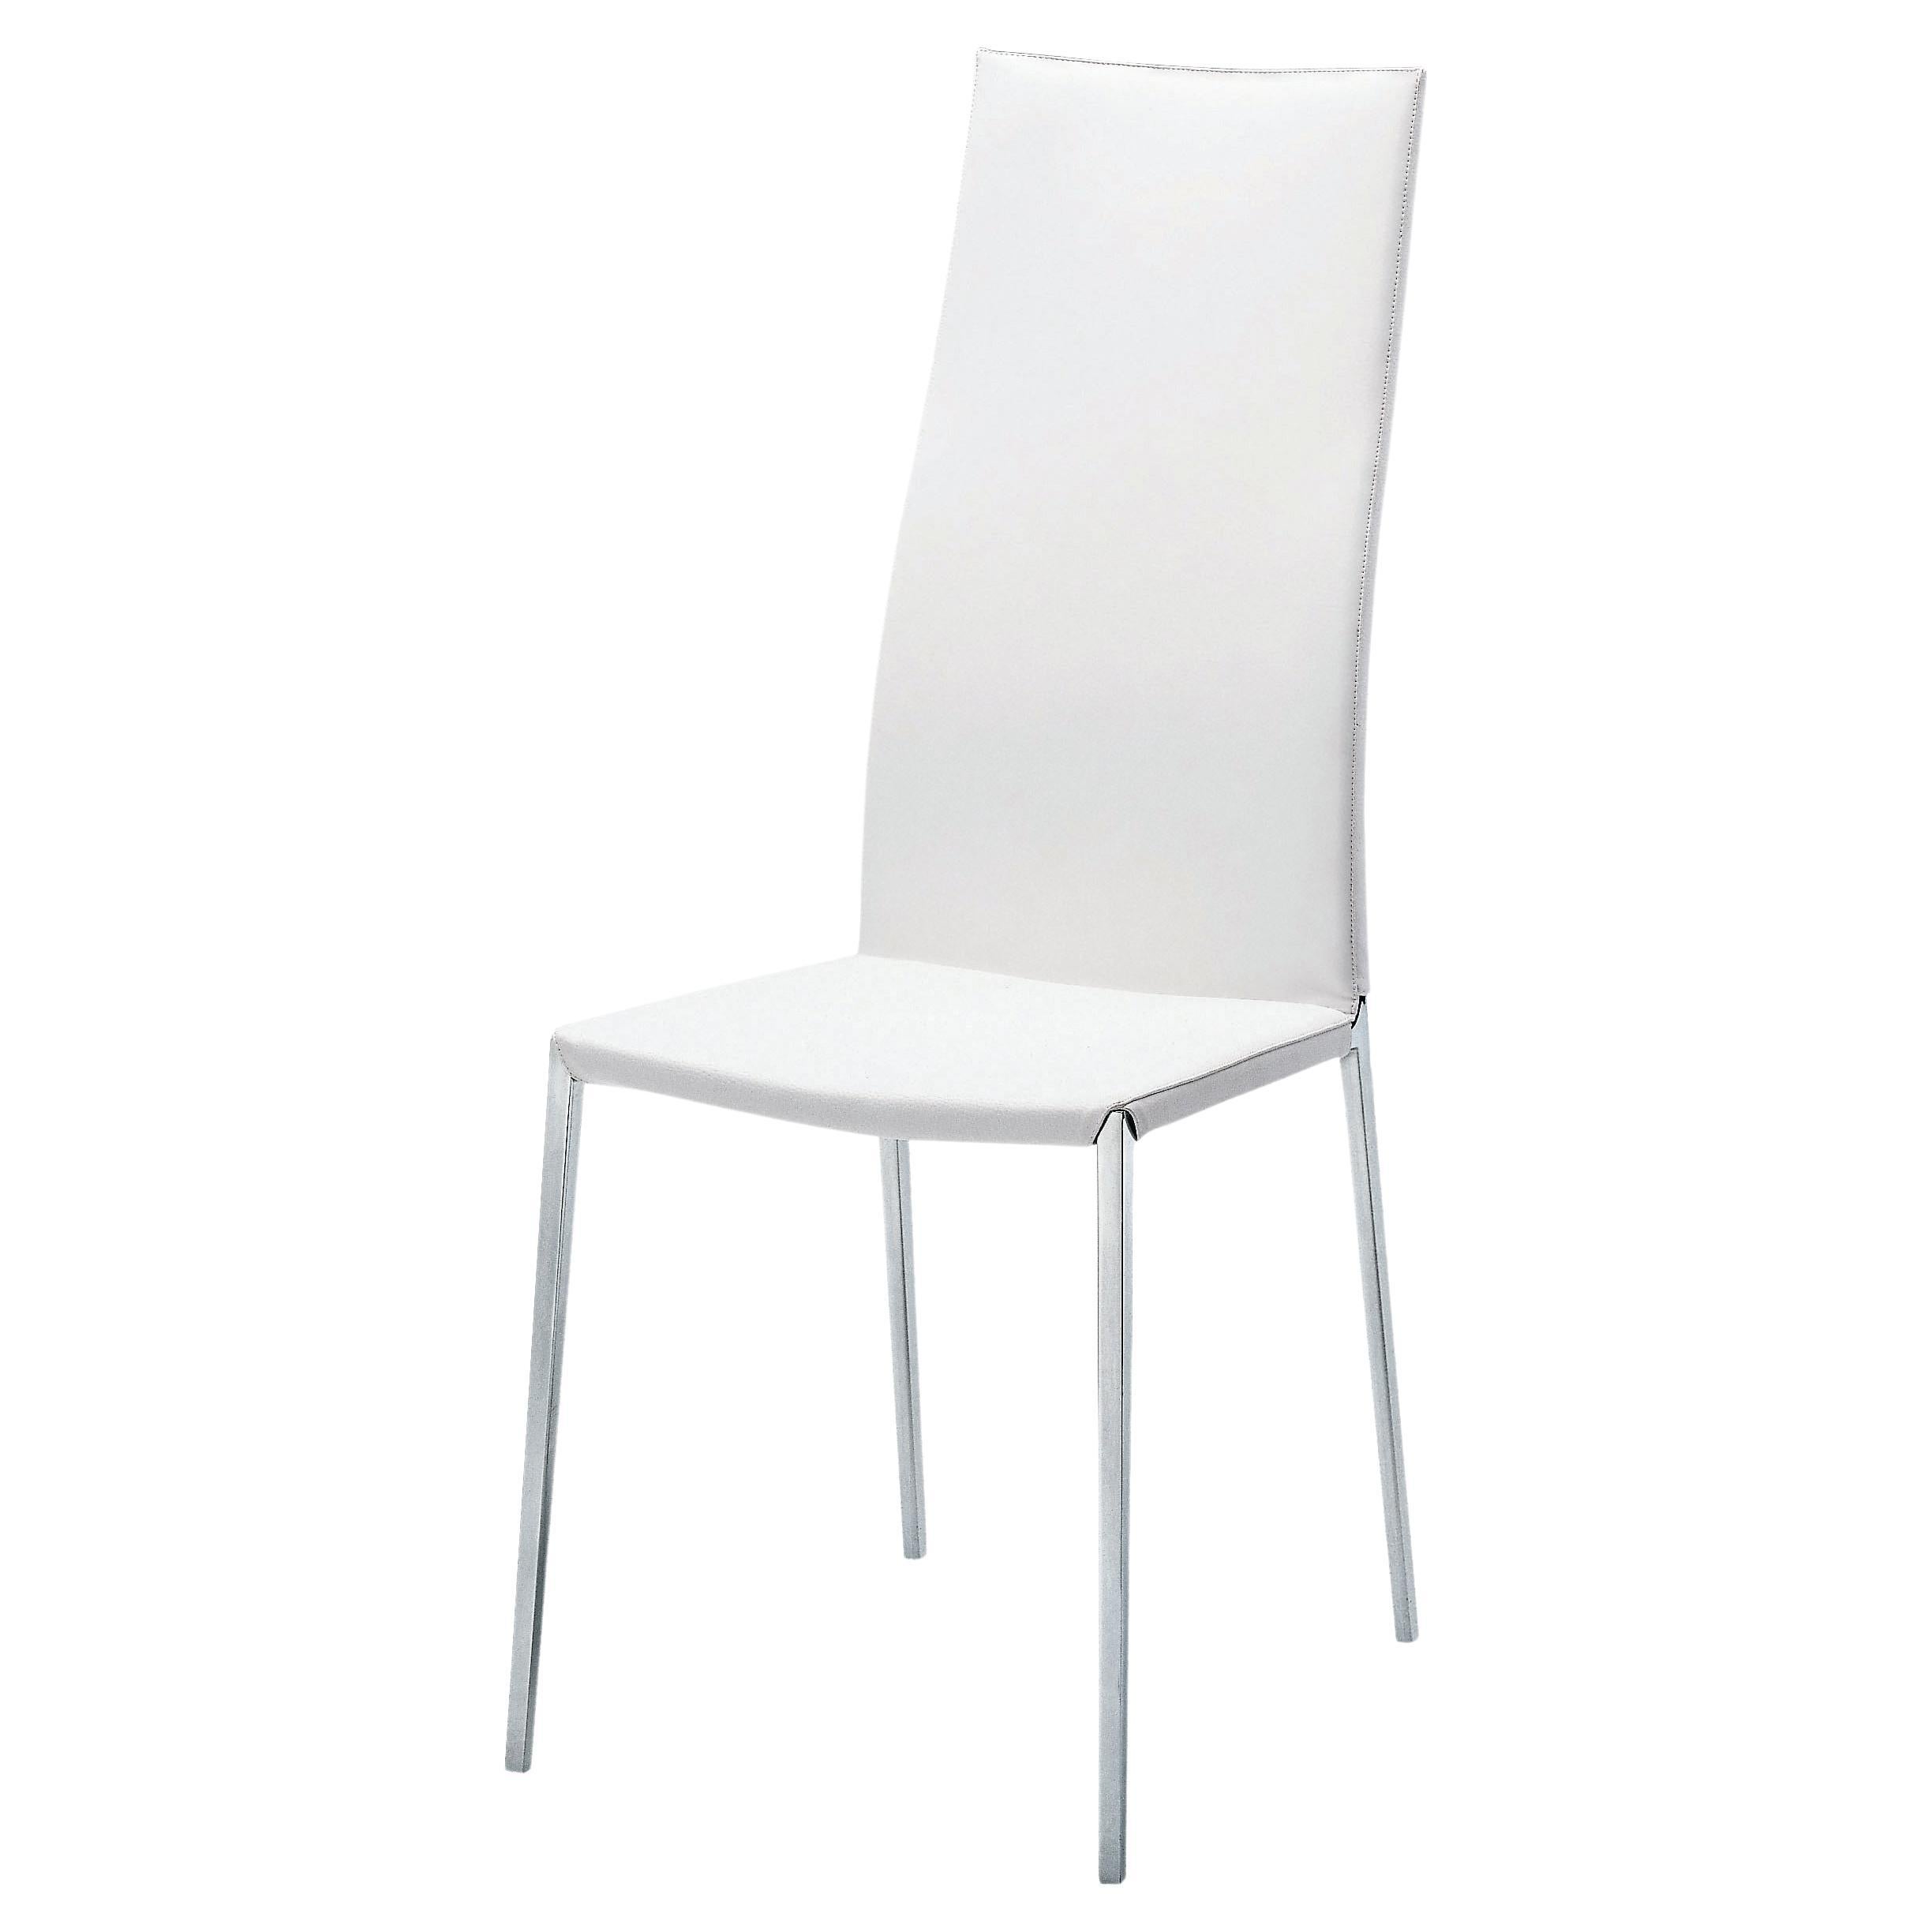 Zanotta Lialta Chair in White Upholstery with Polished Aluminum Frame For Sale